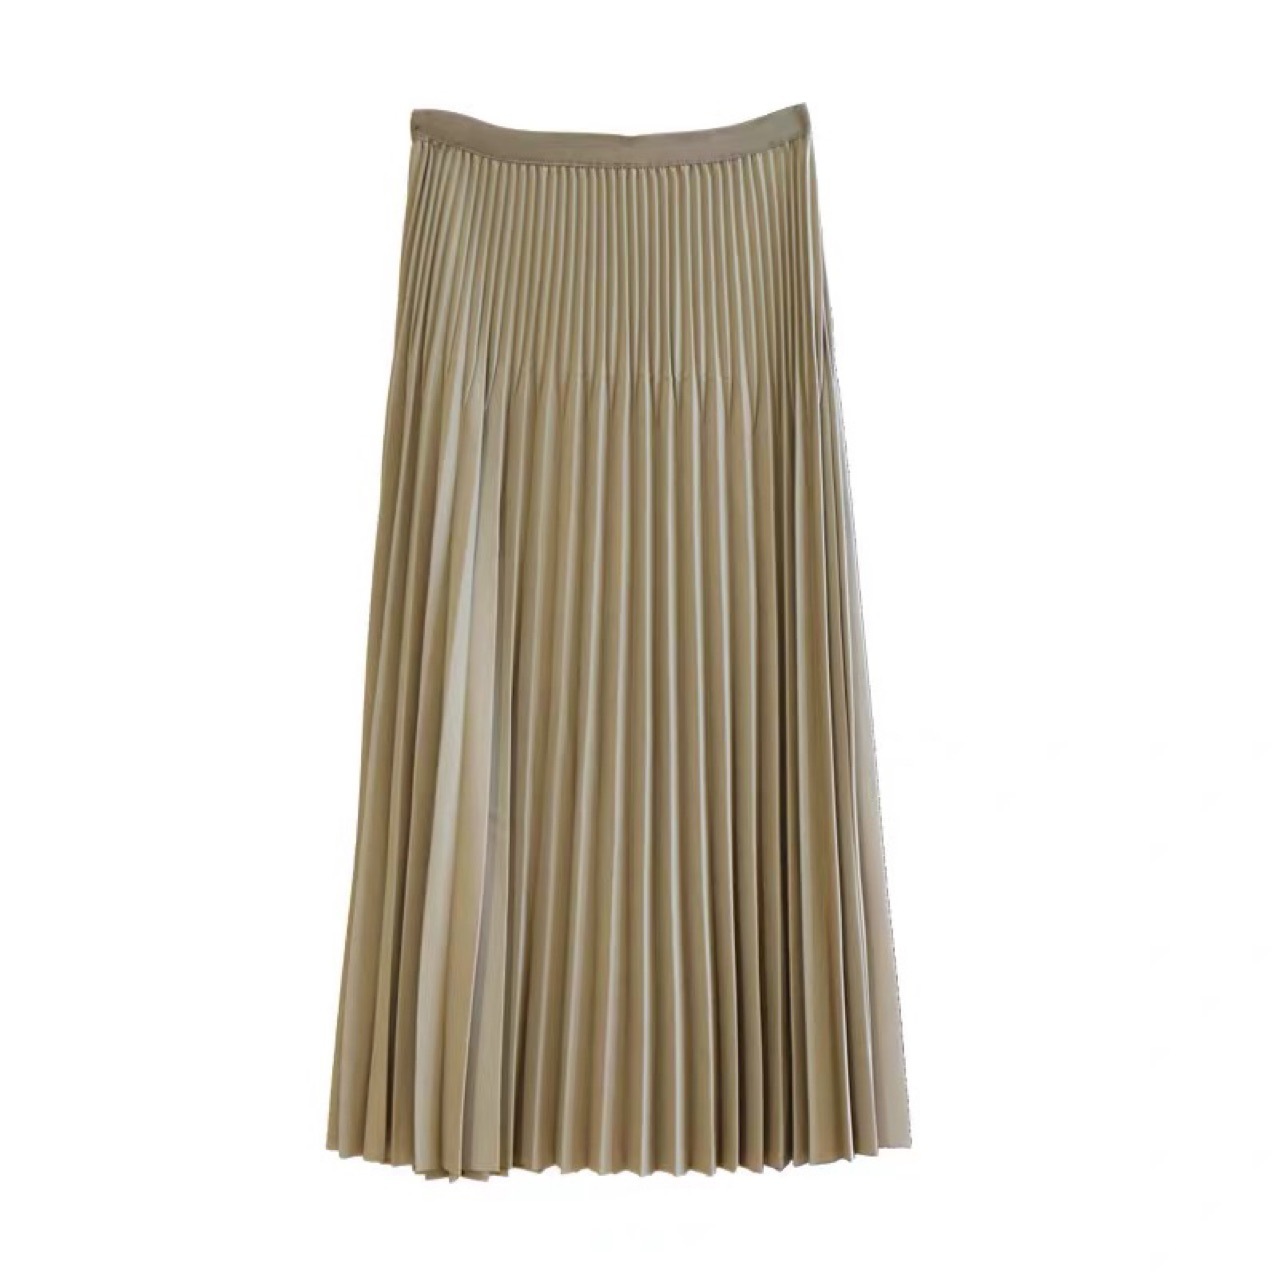 Huge skinny! Heavy Duty Double Pressure Pleated Intellectual Elegance A-line Mid-length Pleated Skirt Women's 21 Autumn Tail Single